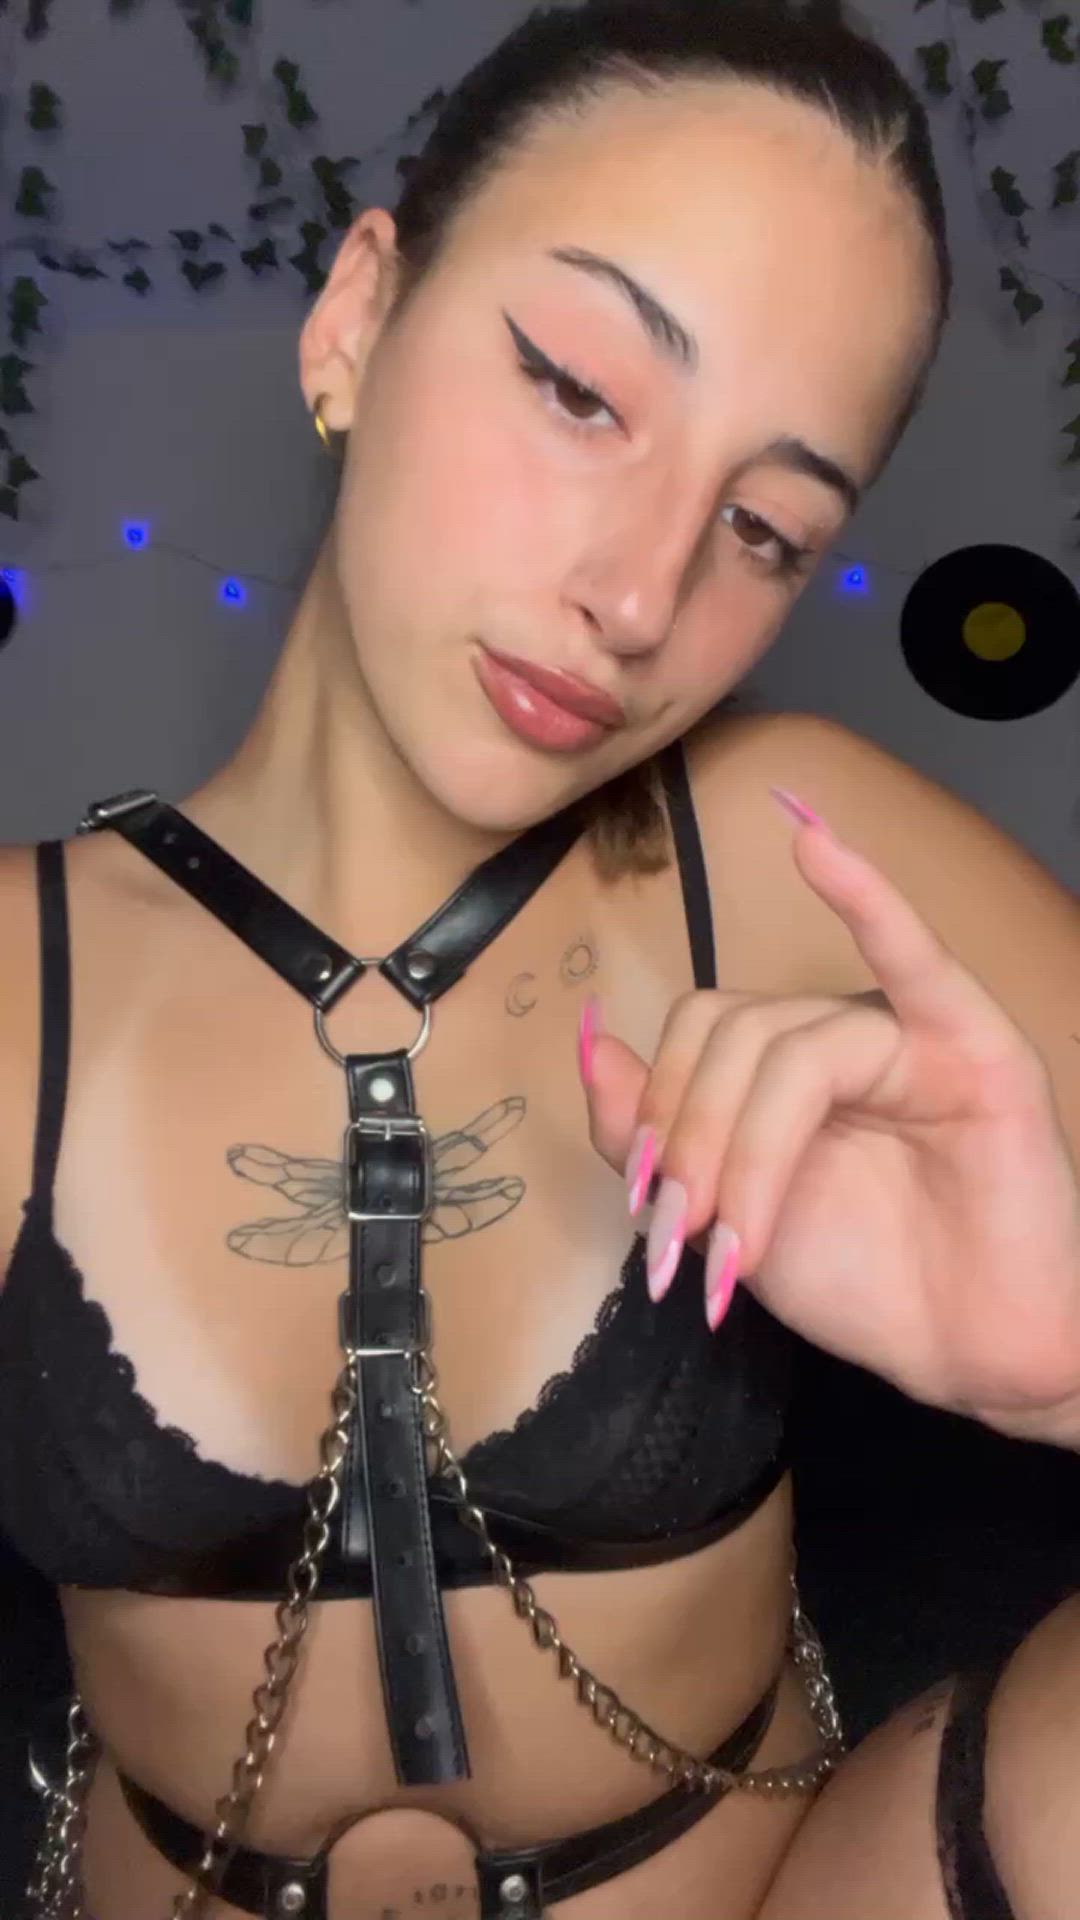 Femdom porn video with onlyfans model blessedpussy444 <strong>@blessedpussy444</strong>